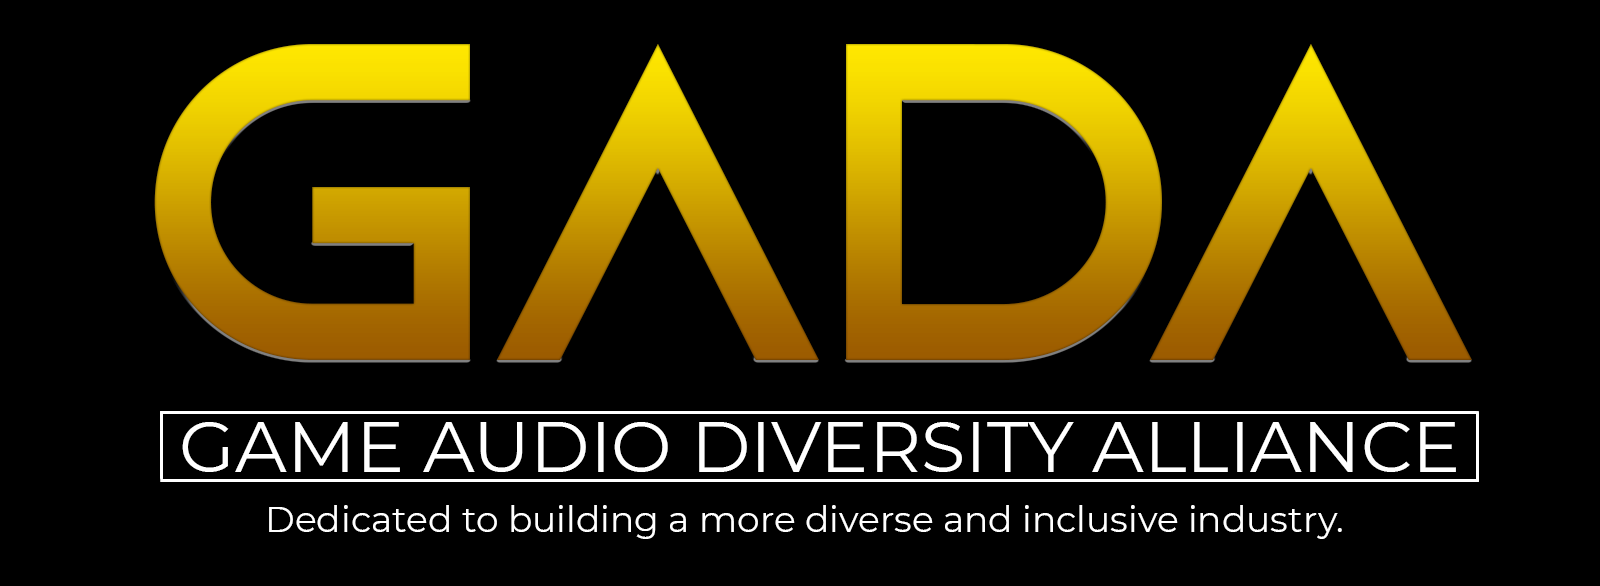 Game Audio Diversity Alliance: Dedicated to building a more diverse and inclusive industry.